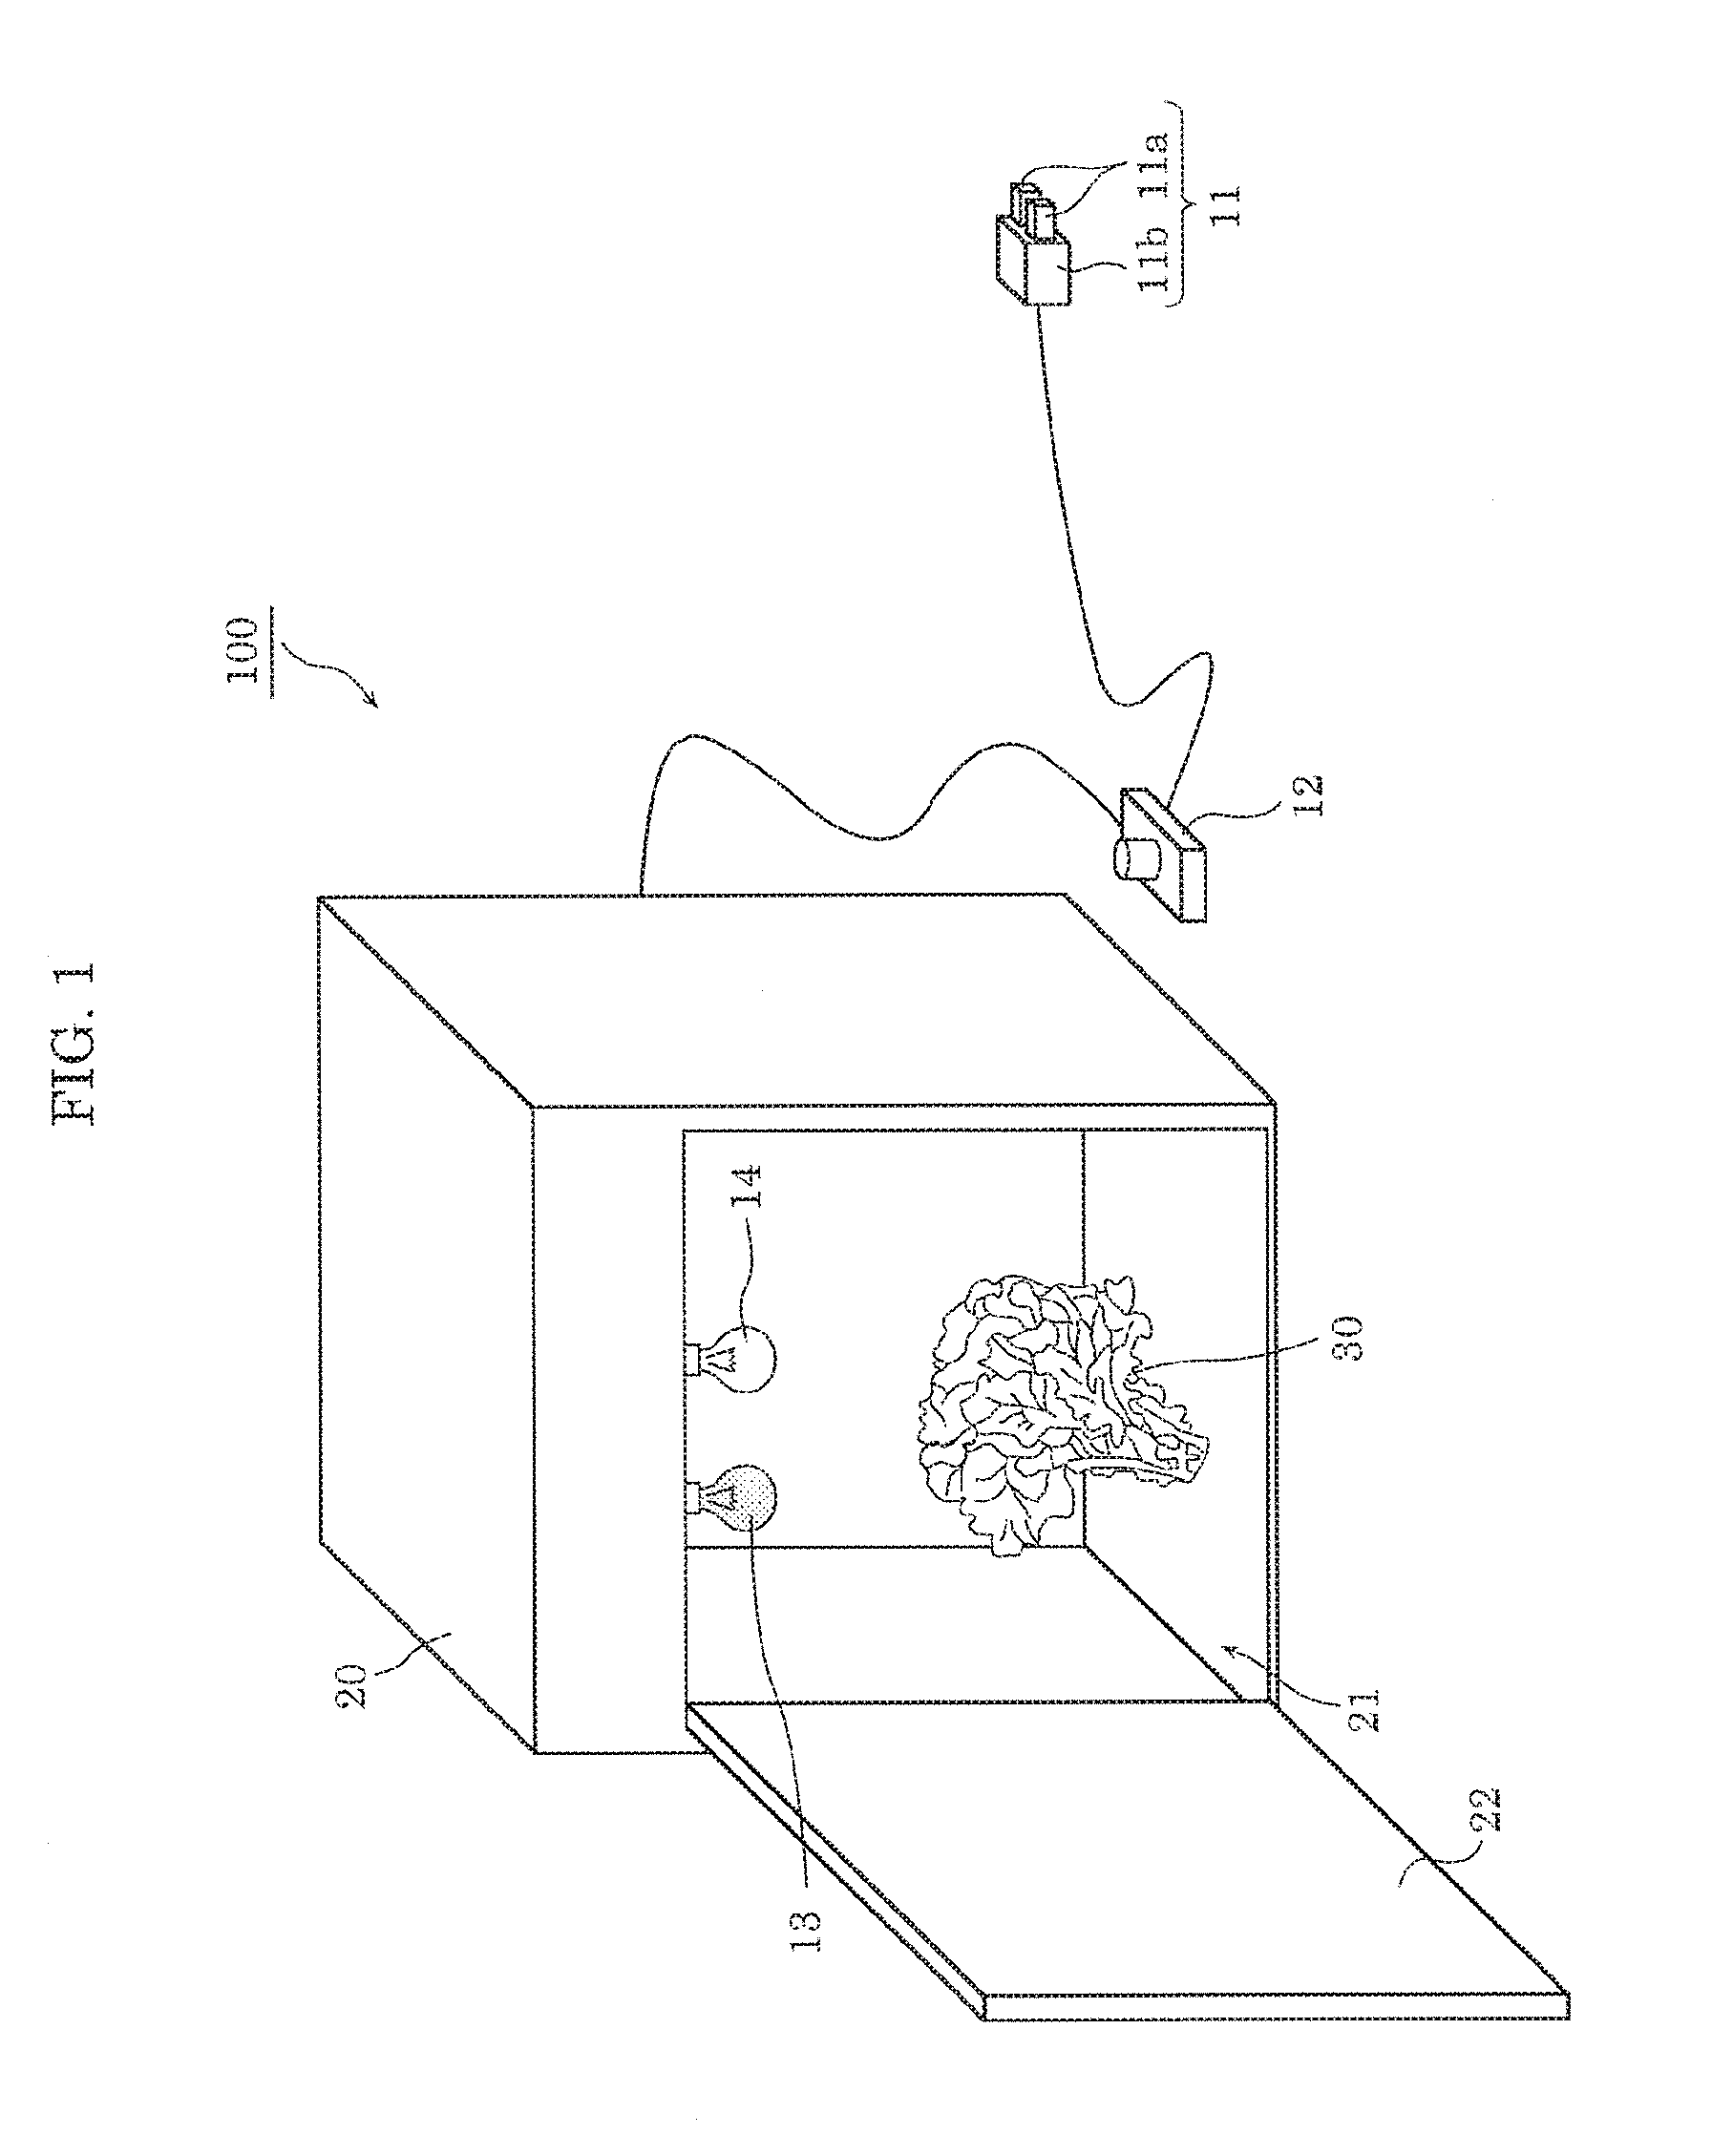 Method of preserving freshness of harvested crops, freshness preservation device, repository, and display device